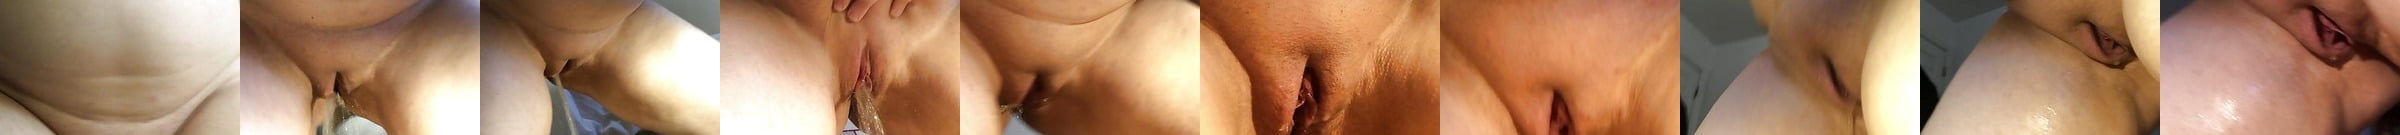 Female Pee Compilation Free Close Up Piss Hd Porn 51